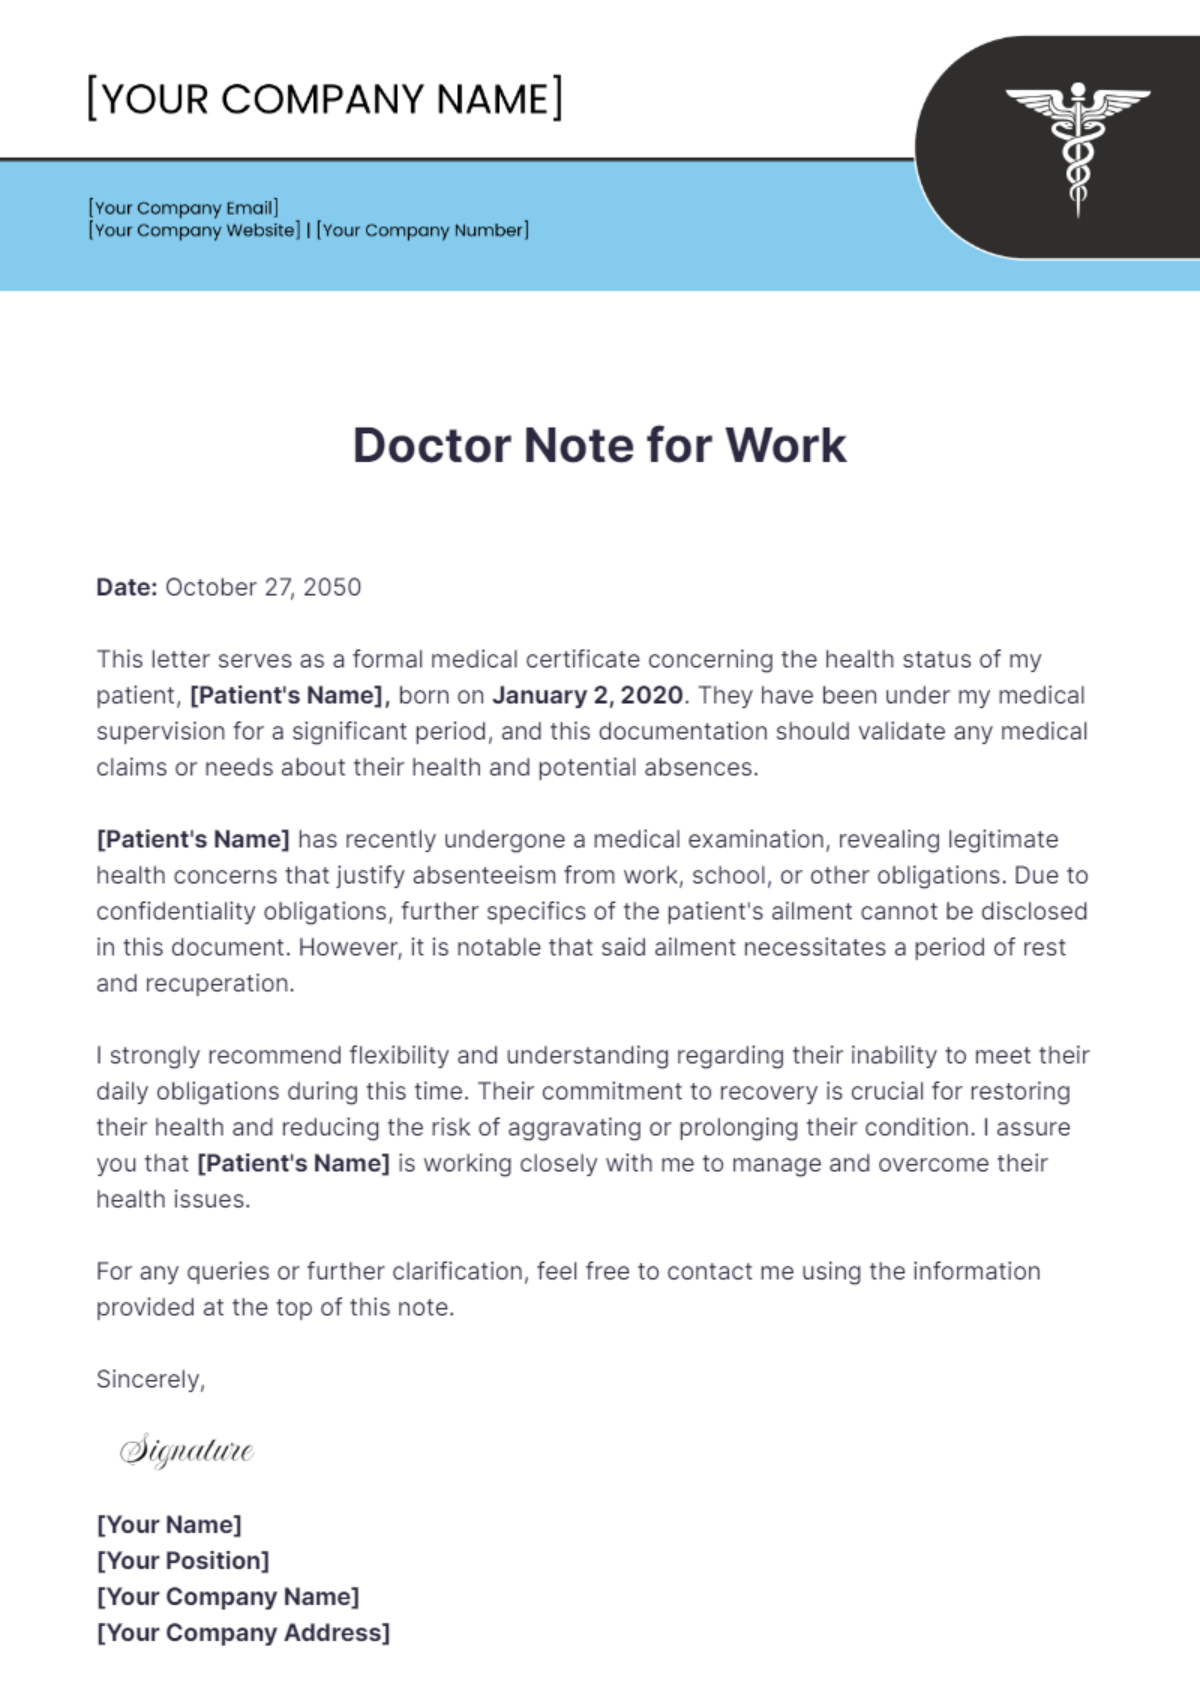 Free Doctor Note For Work Template